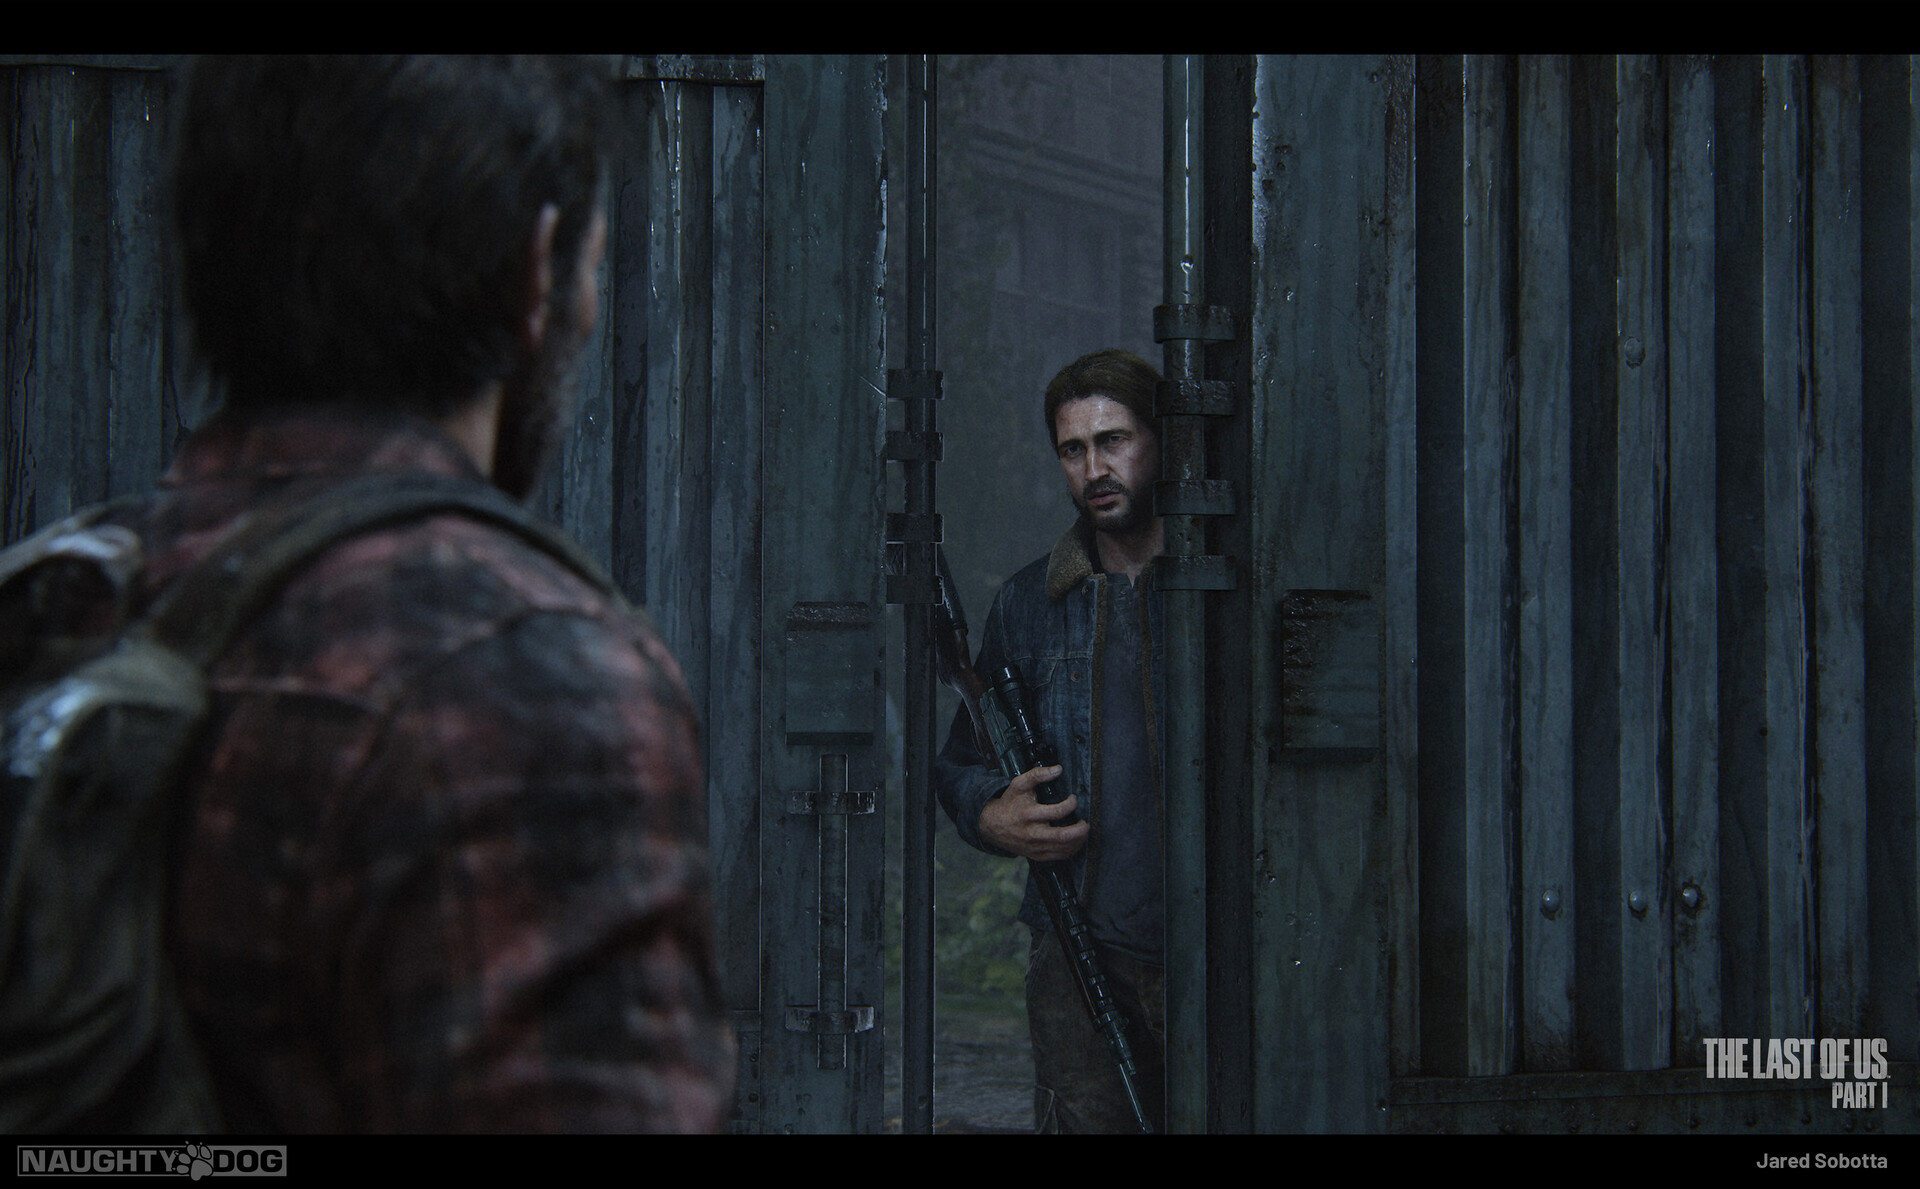 The Last Of Us 1 wallpaper by kevintorrescherry - Download on